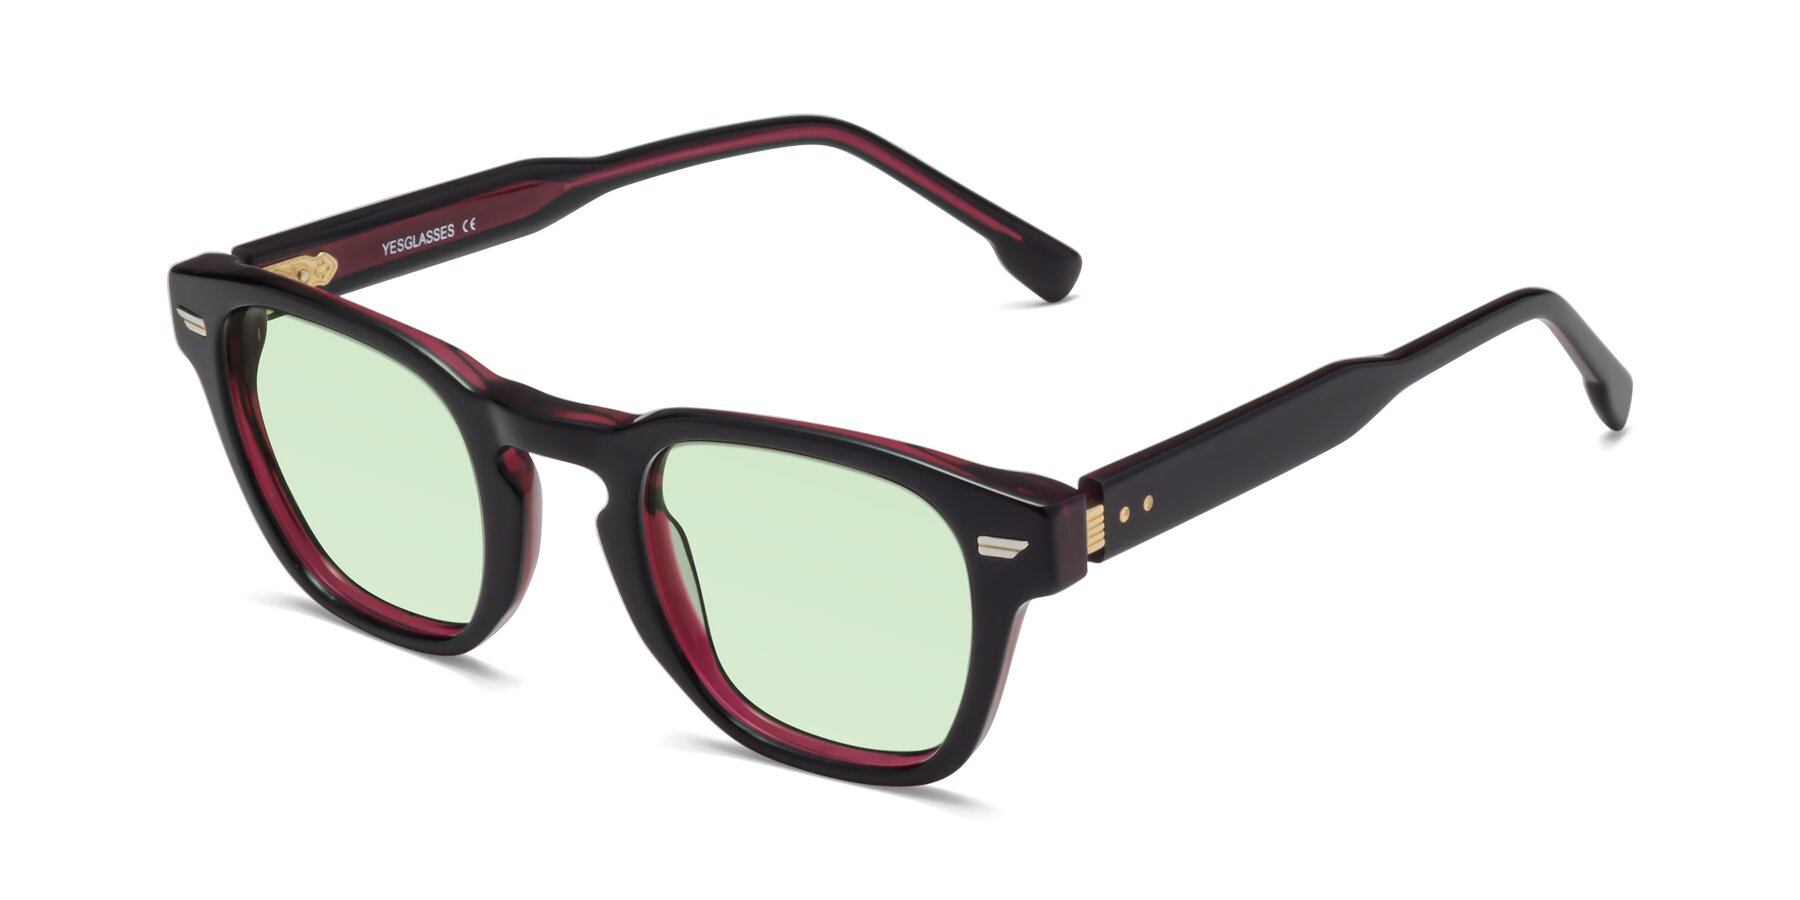 Angle of 1421 in Black-Wine with Light Green Tinted Lenses